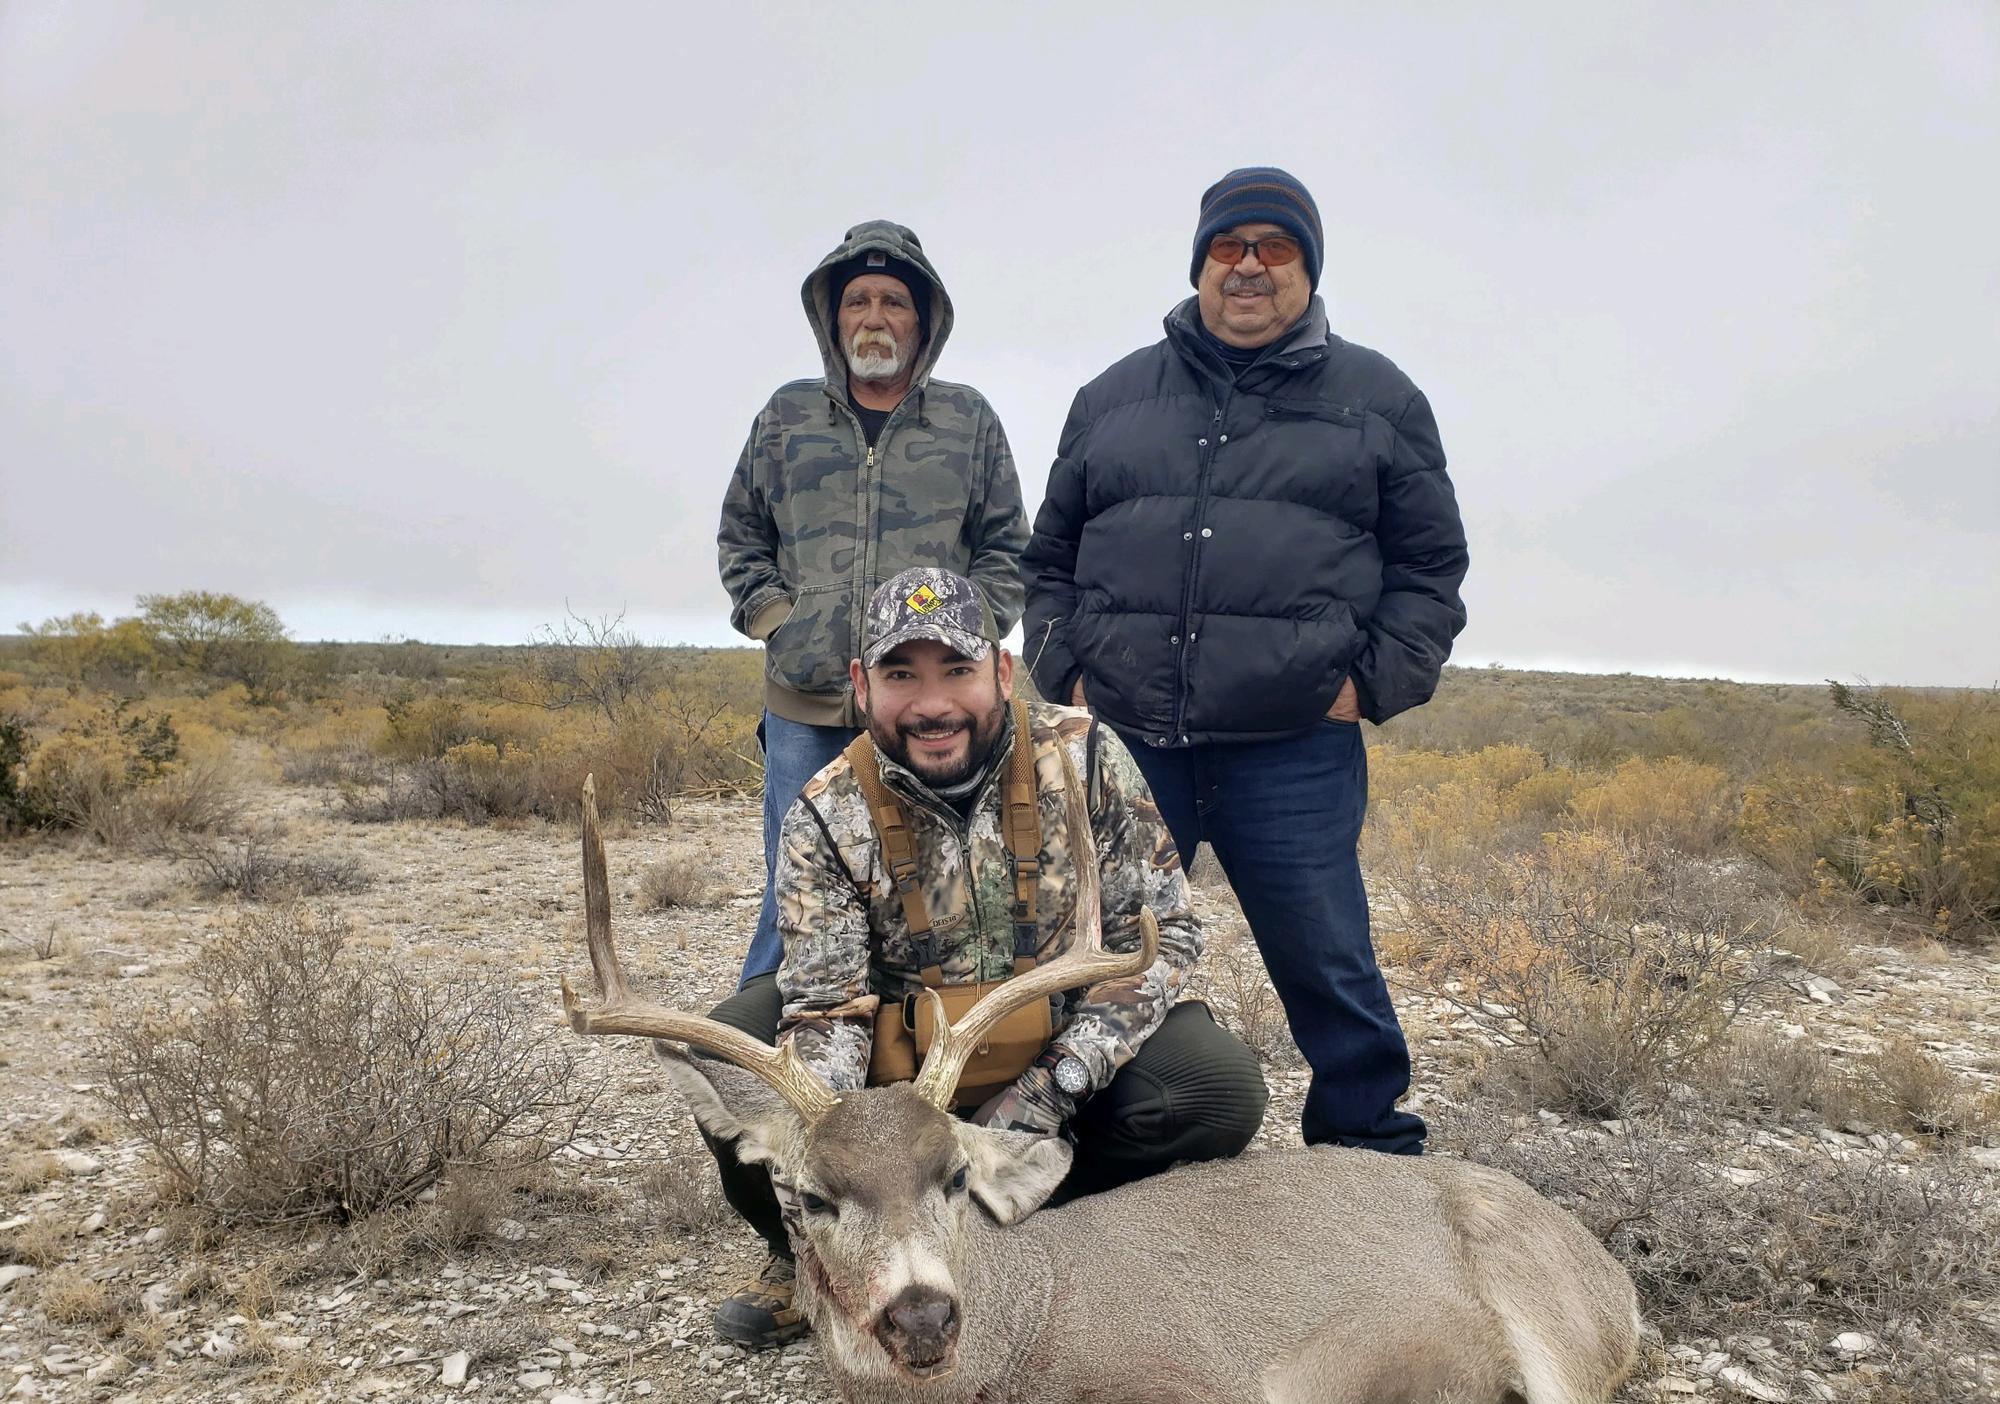 Michael showing off his hunt with Alba’s Dad, Antonio and family friend, Carlos